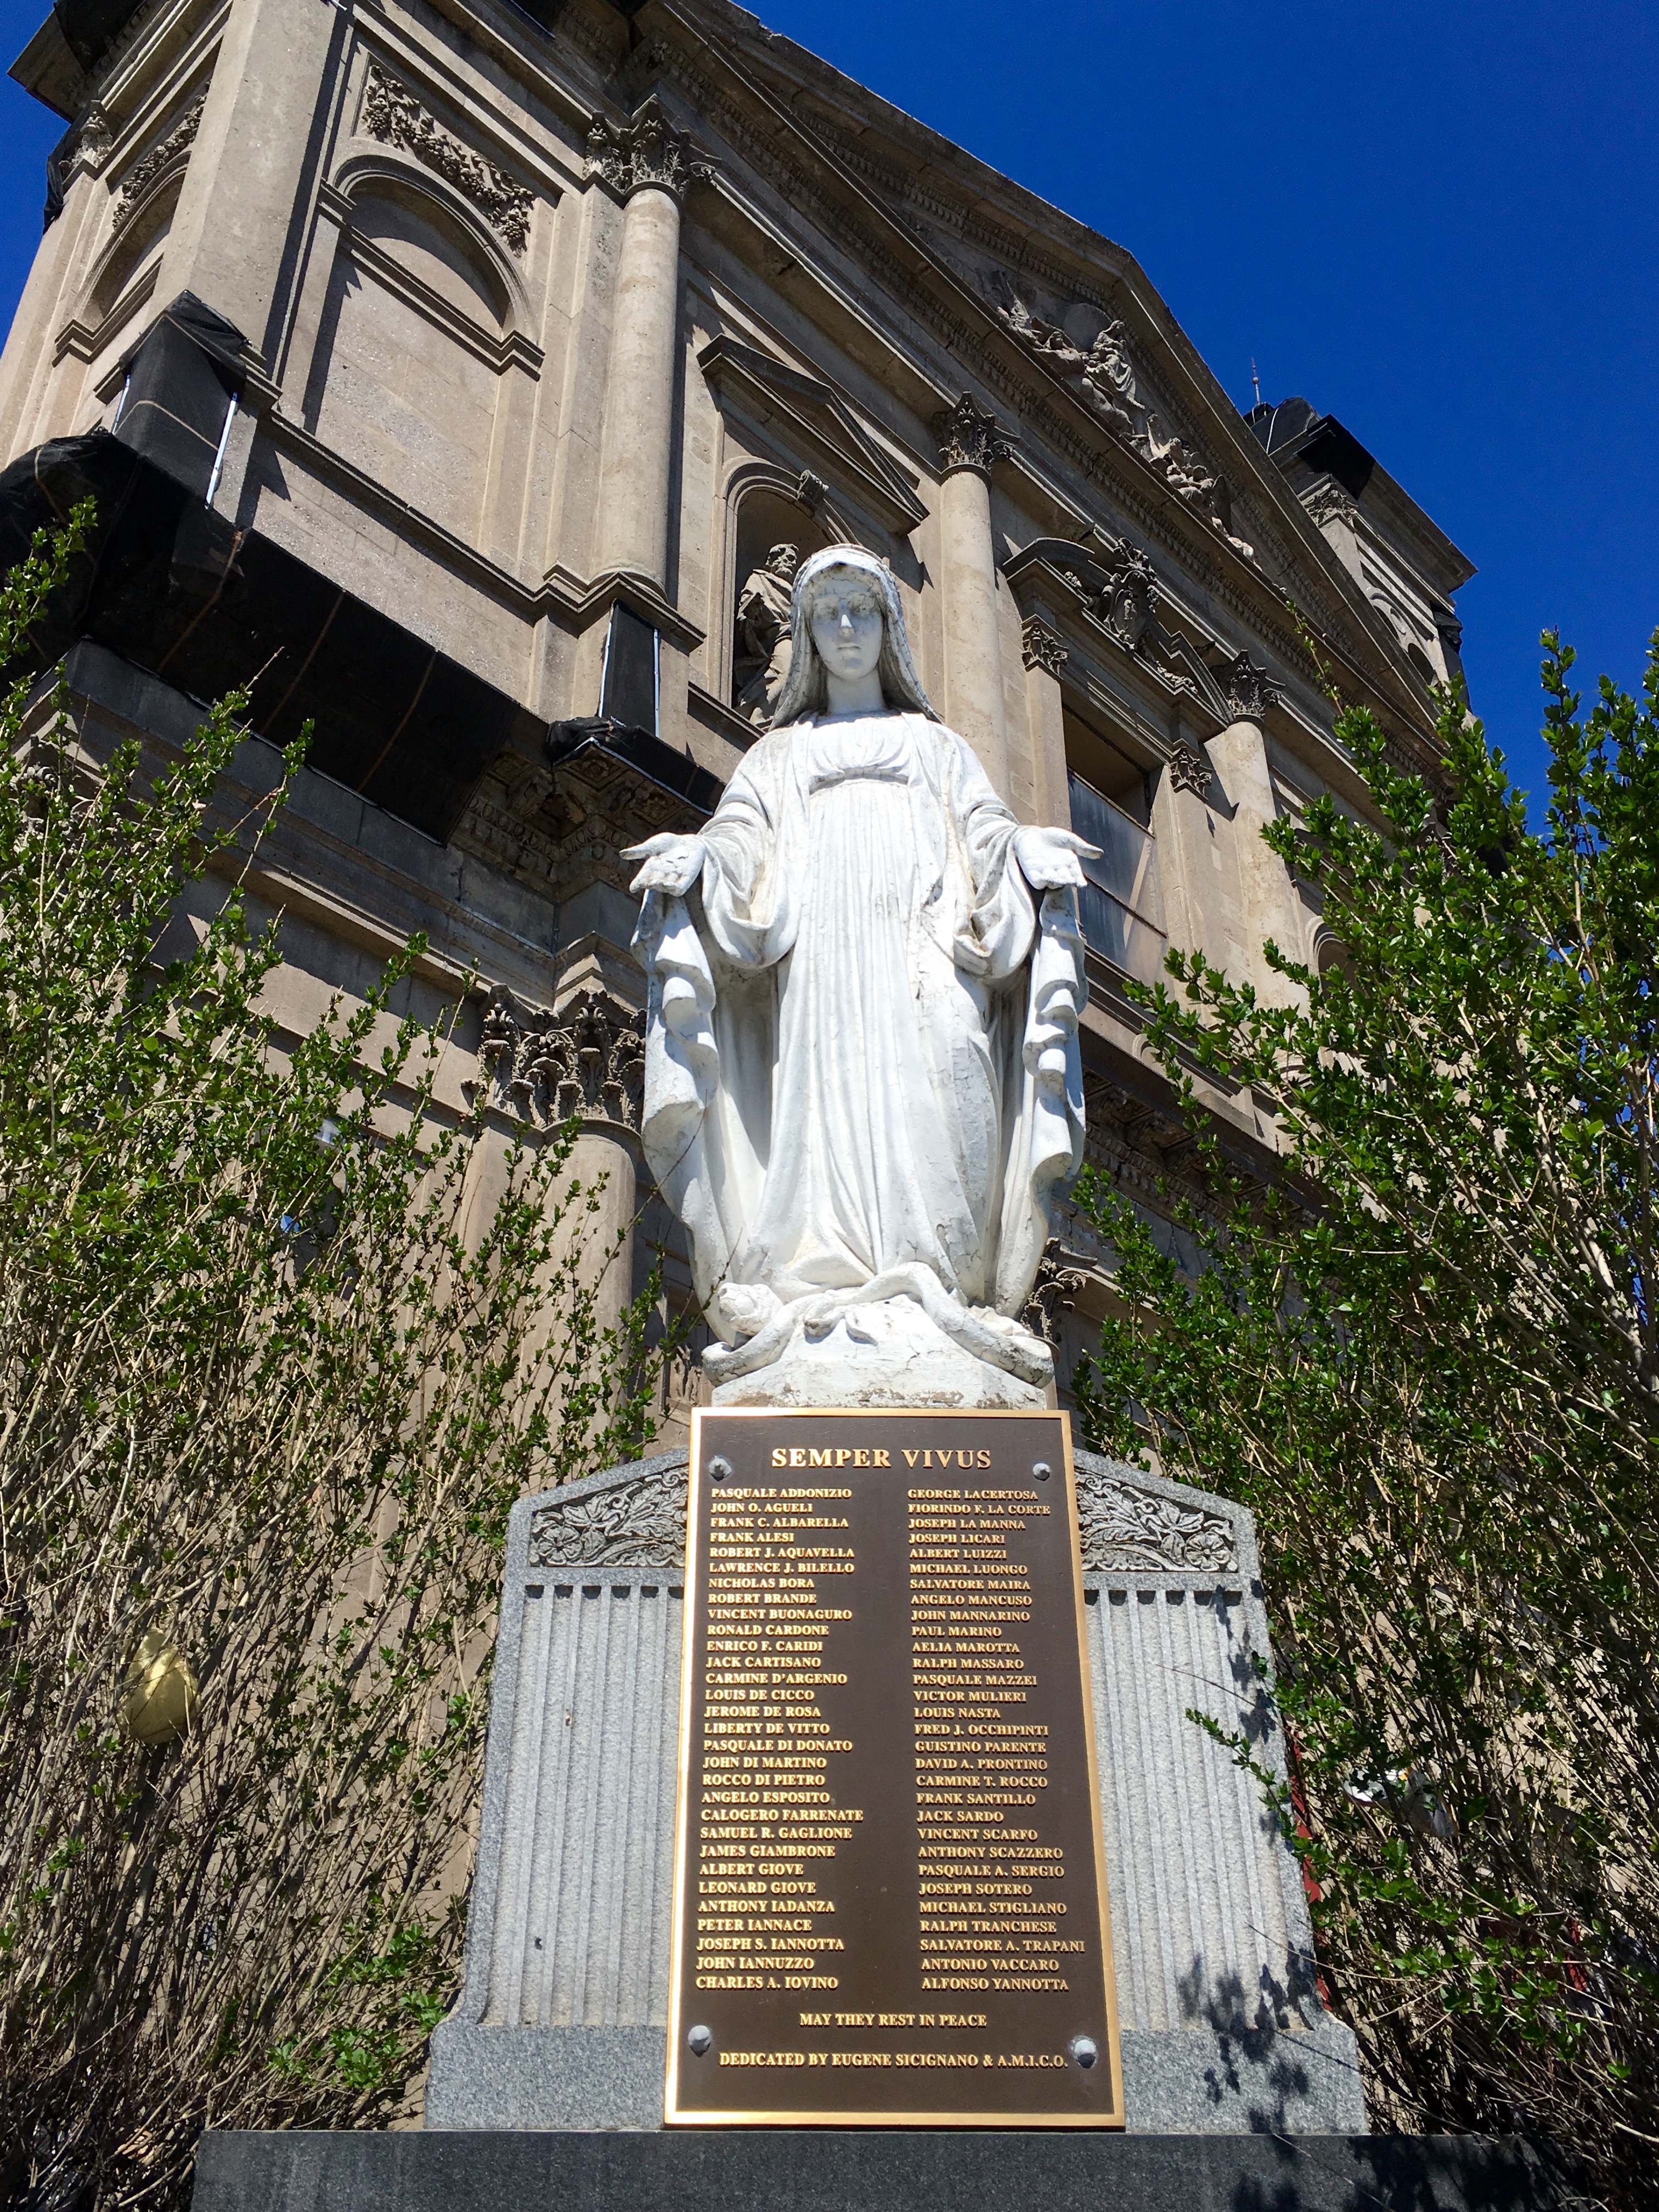 This statue and war memorial stood outside Our Lady of Loreto. Eagle file photo by Lore Croghan